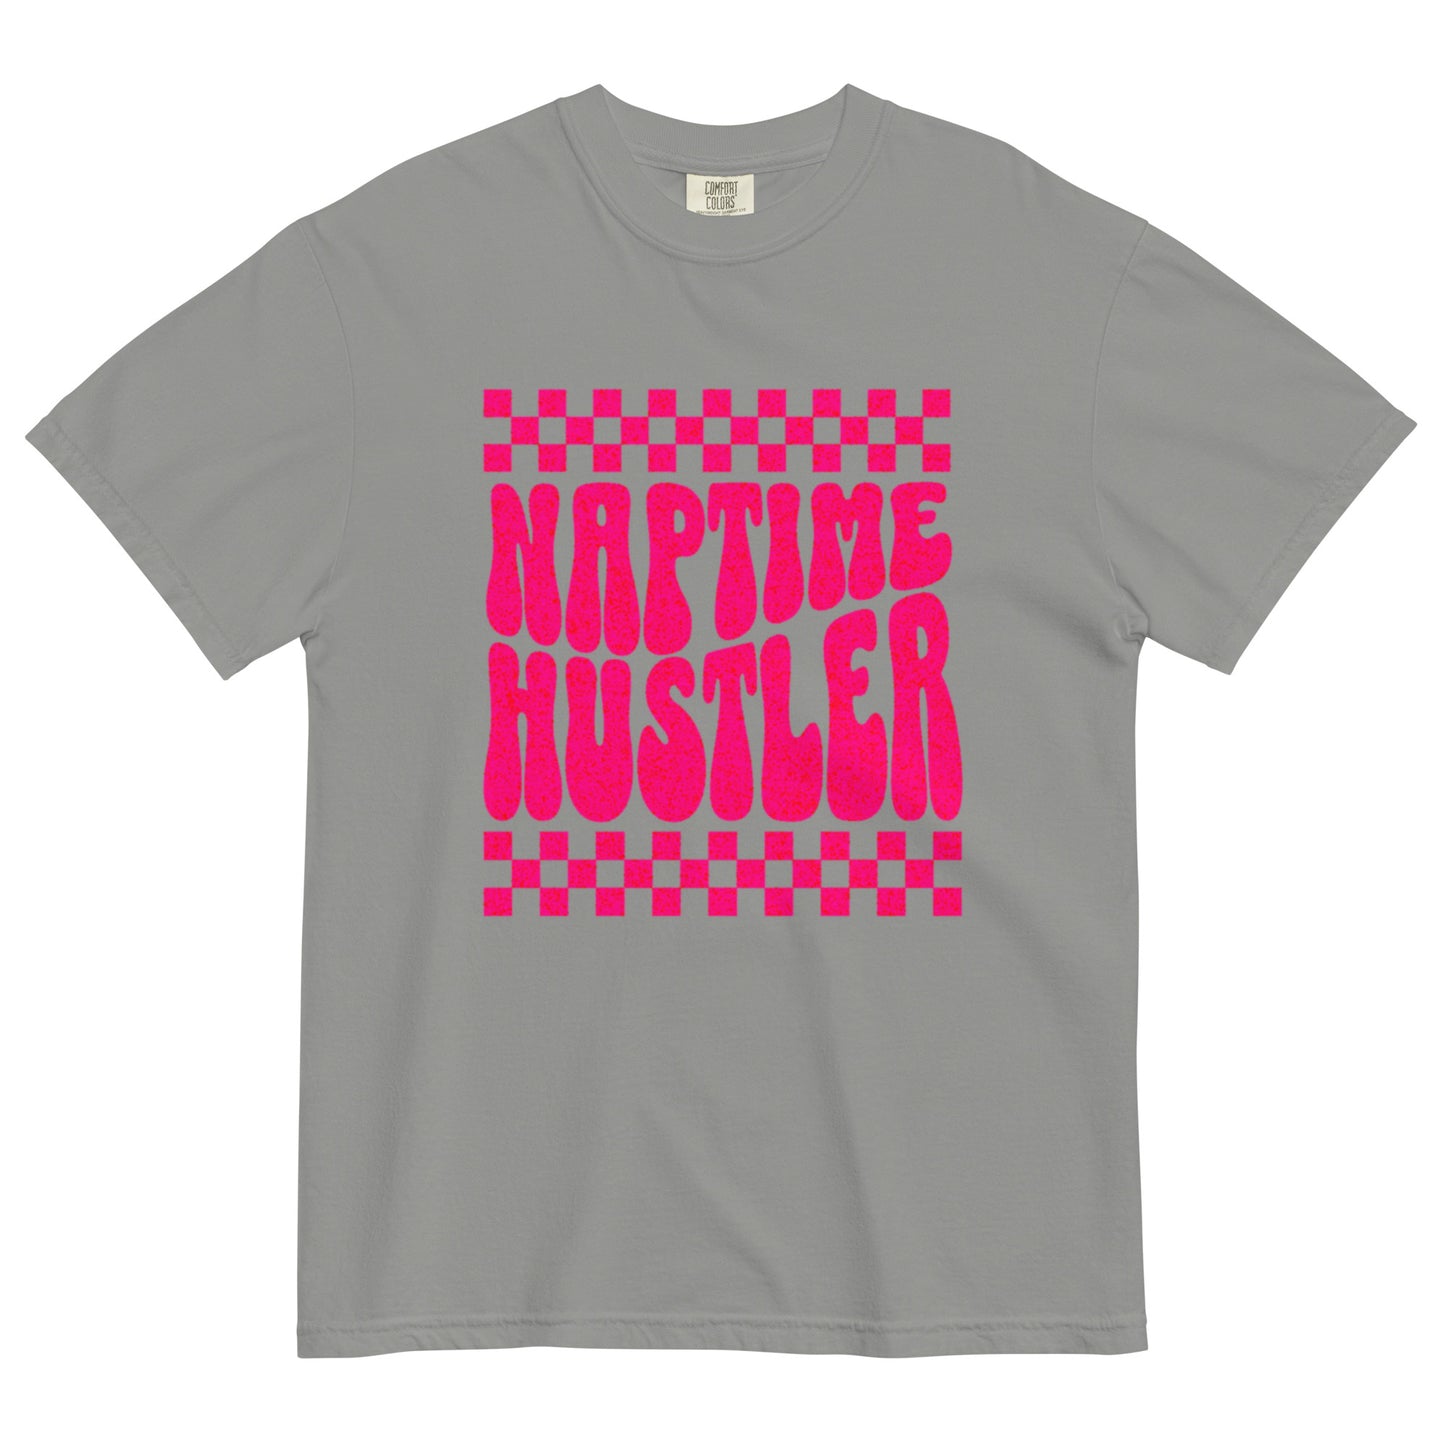 The Naptime Hustle Graphic Tee